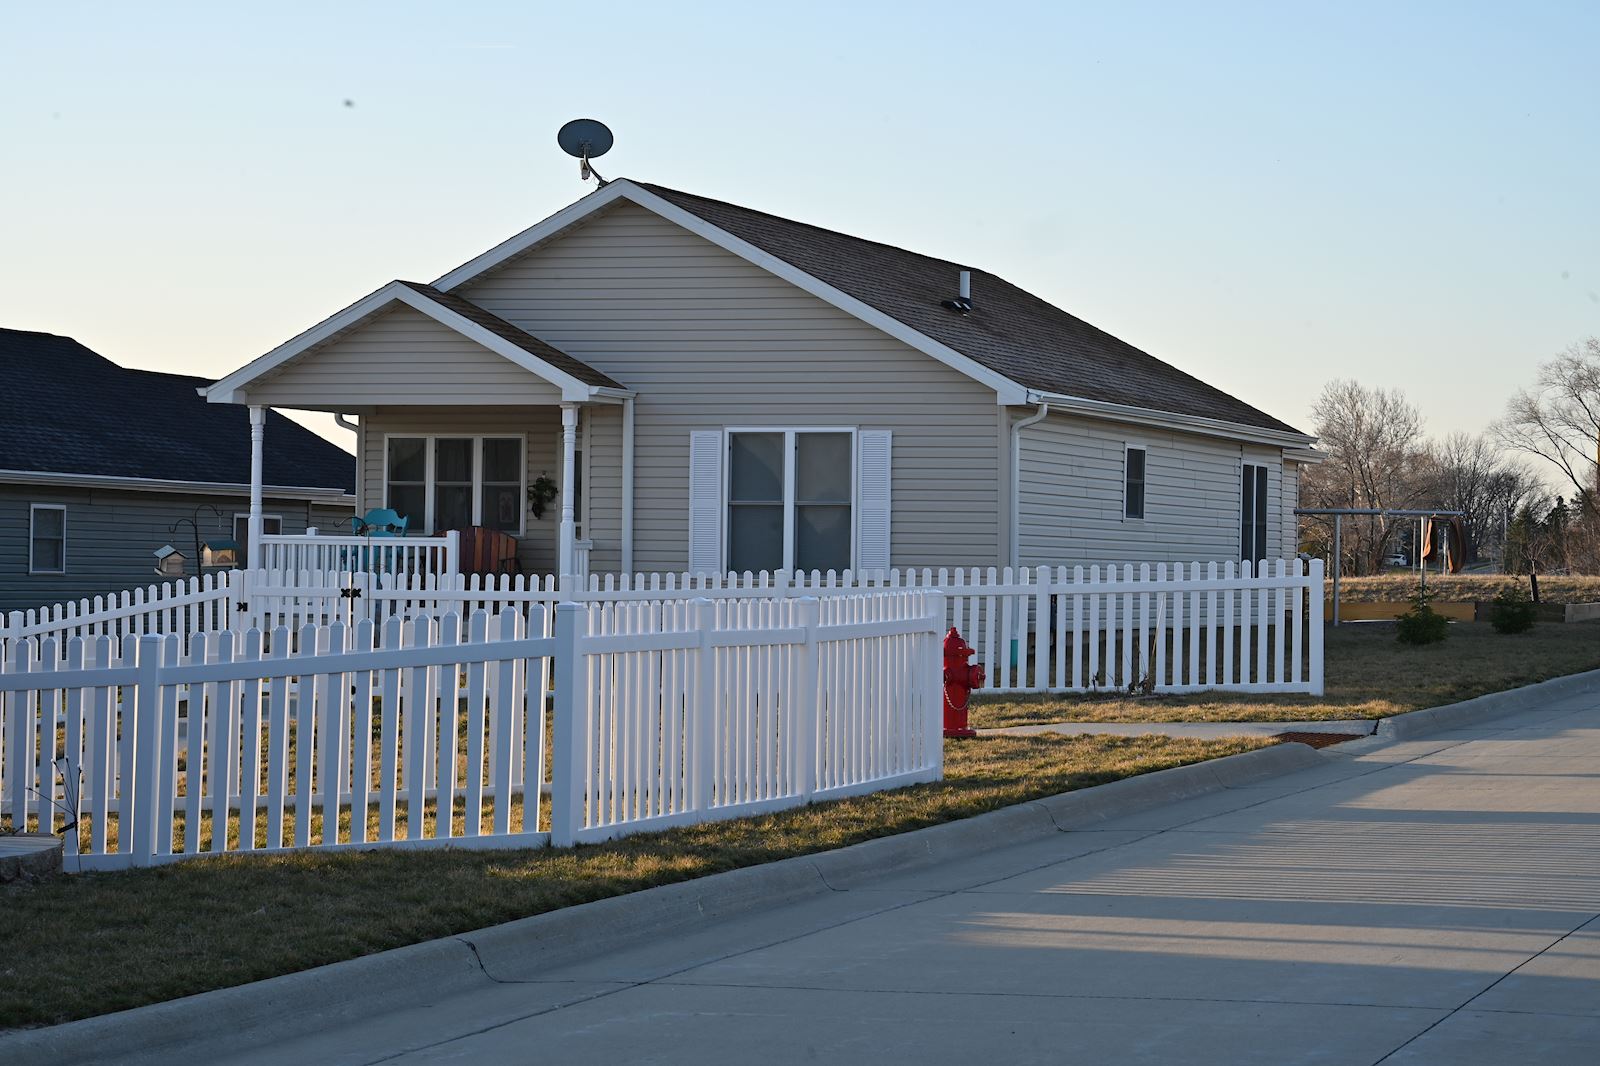 Pocket Neighborhood Provides Affordable Homeownership Opportunities for Rural Iowa